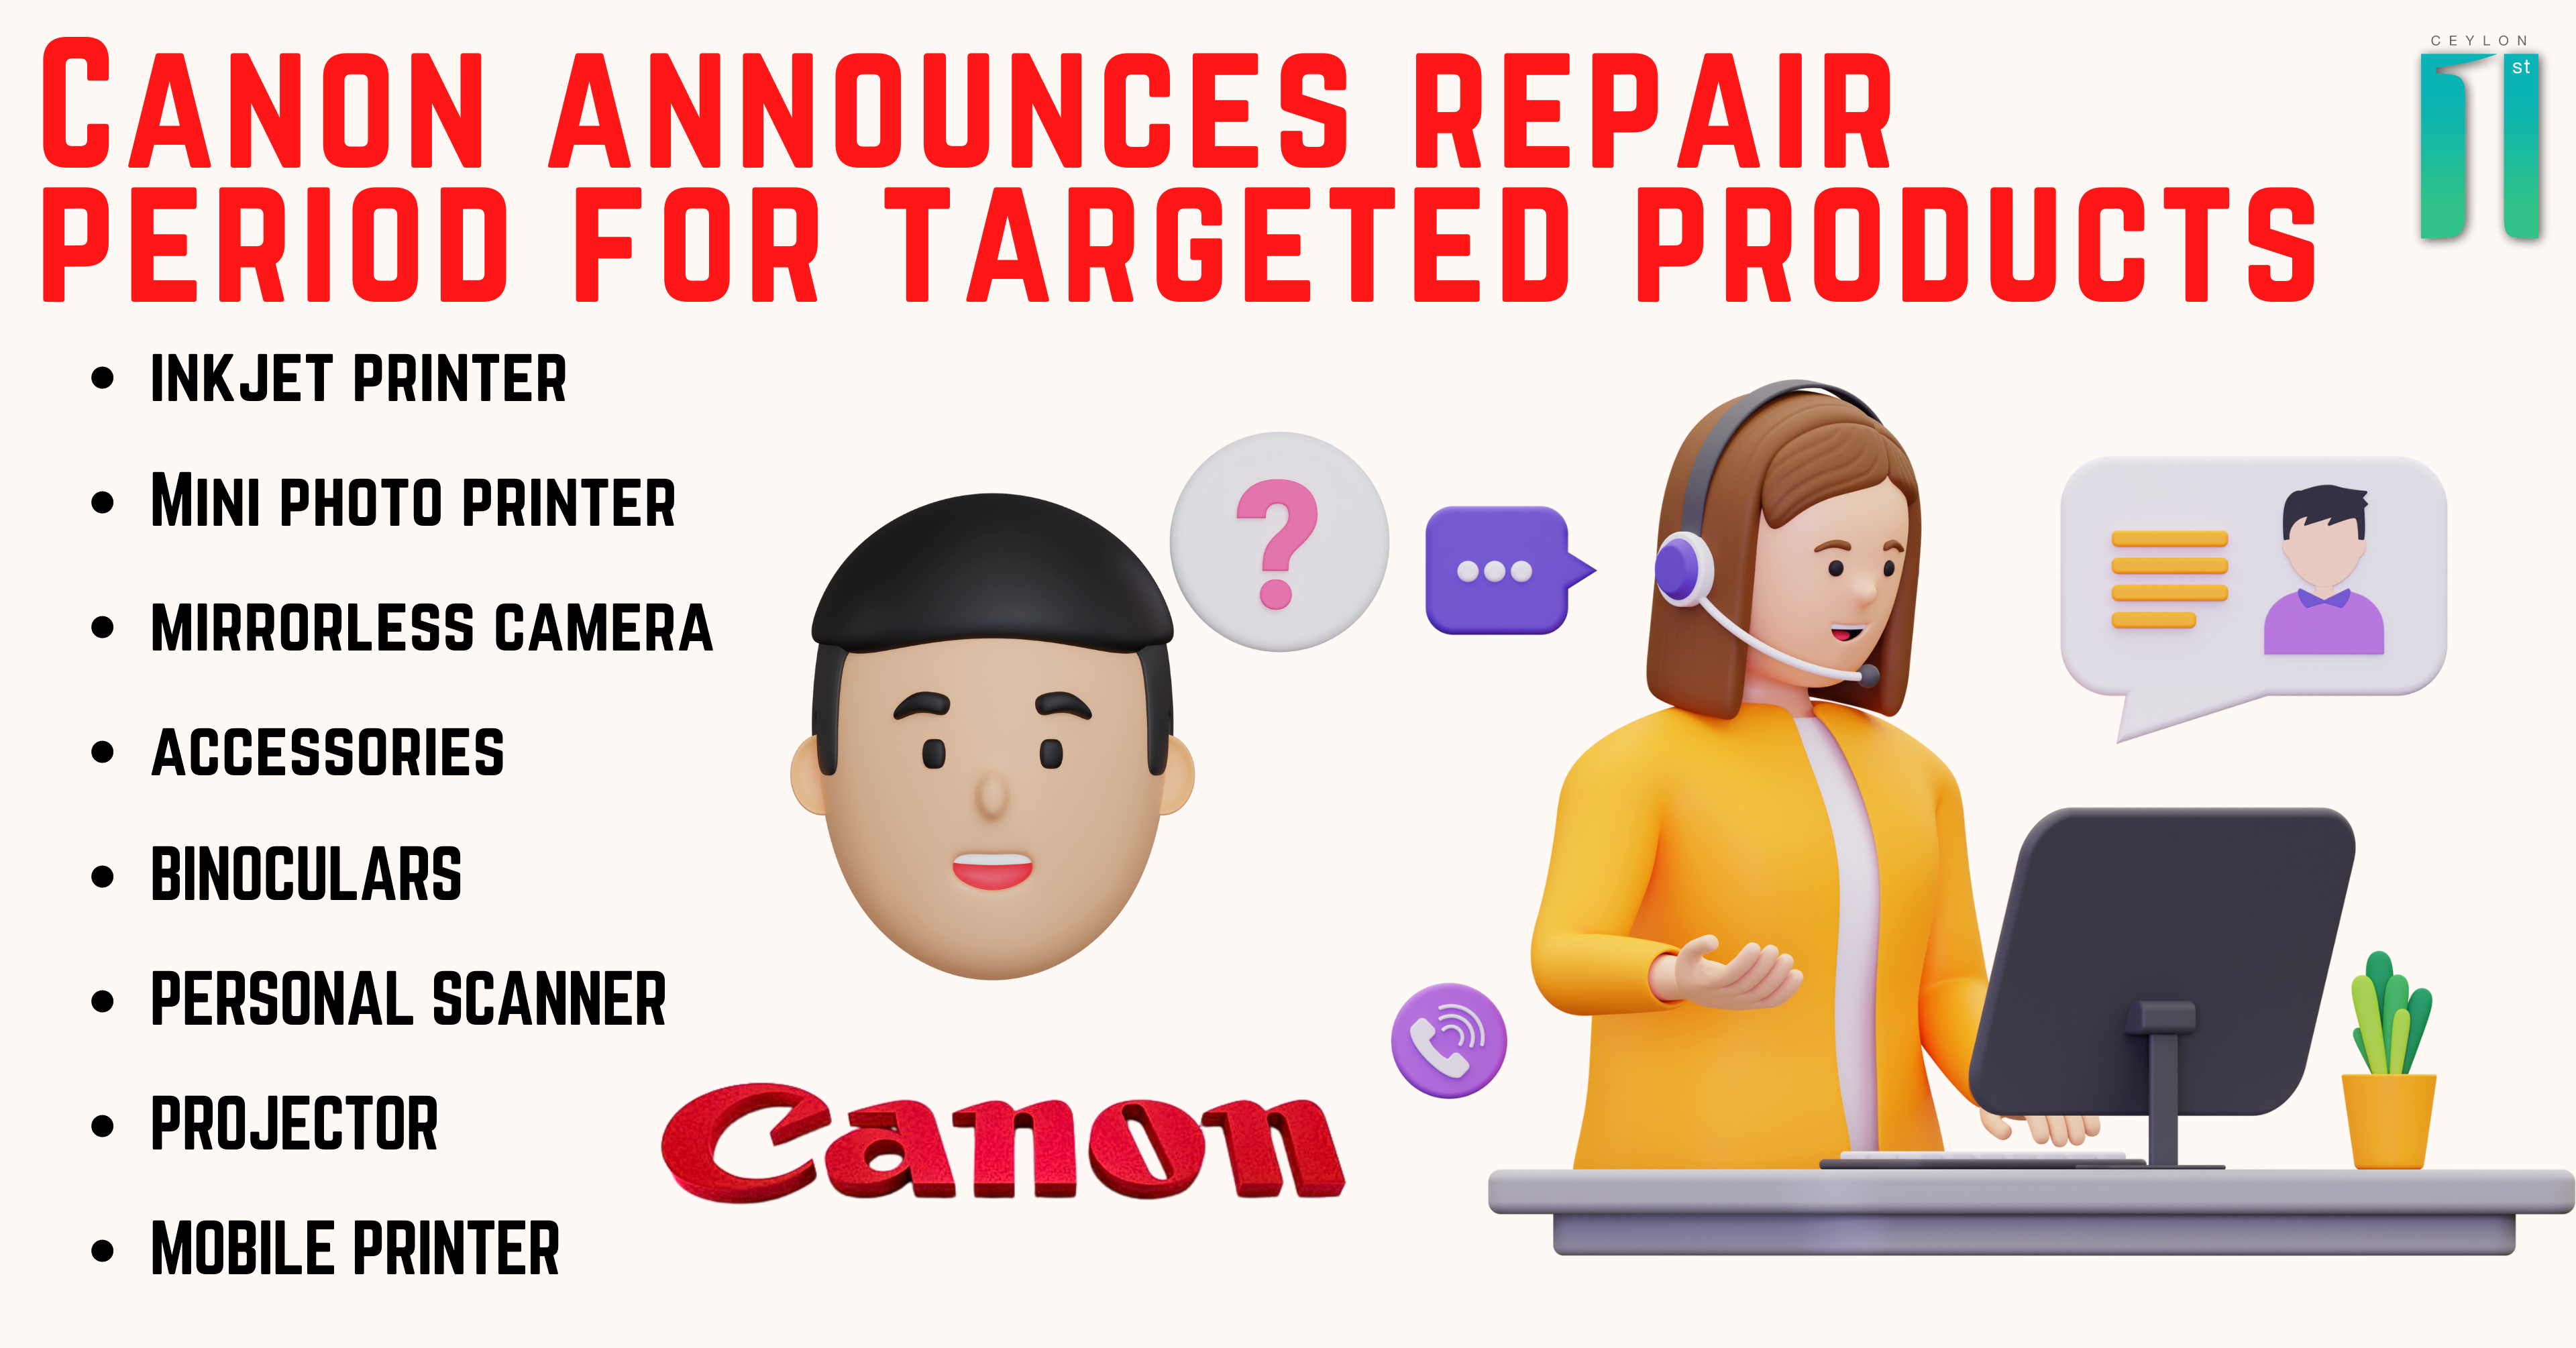 Canon announce repair period of target products